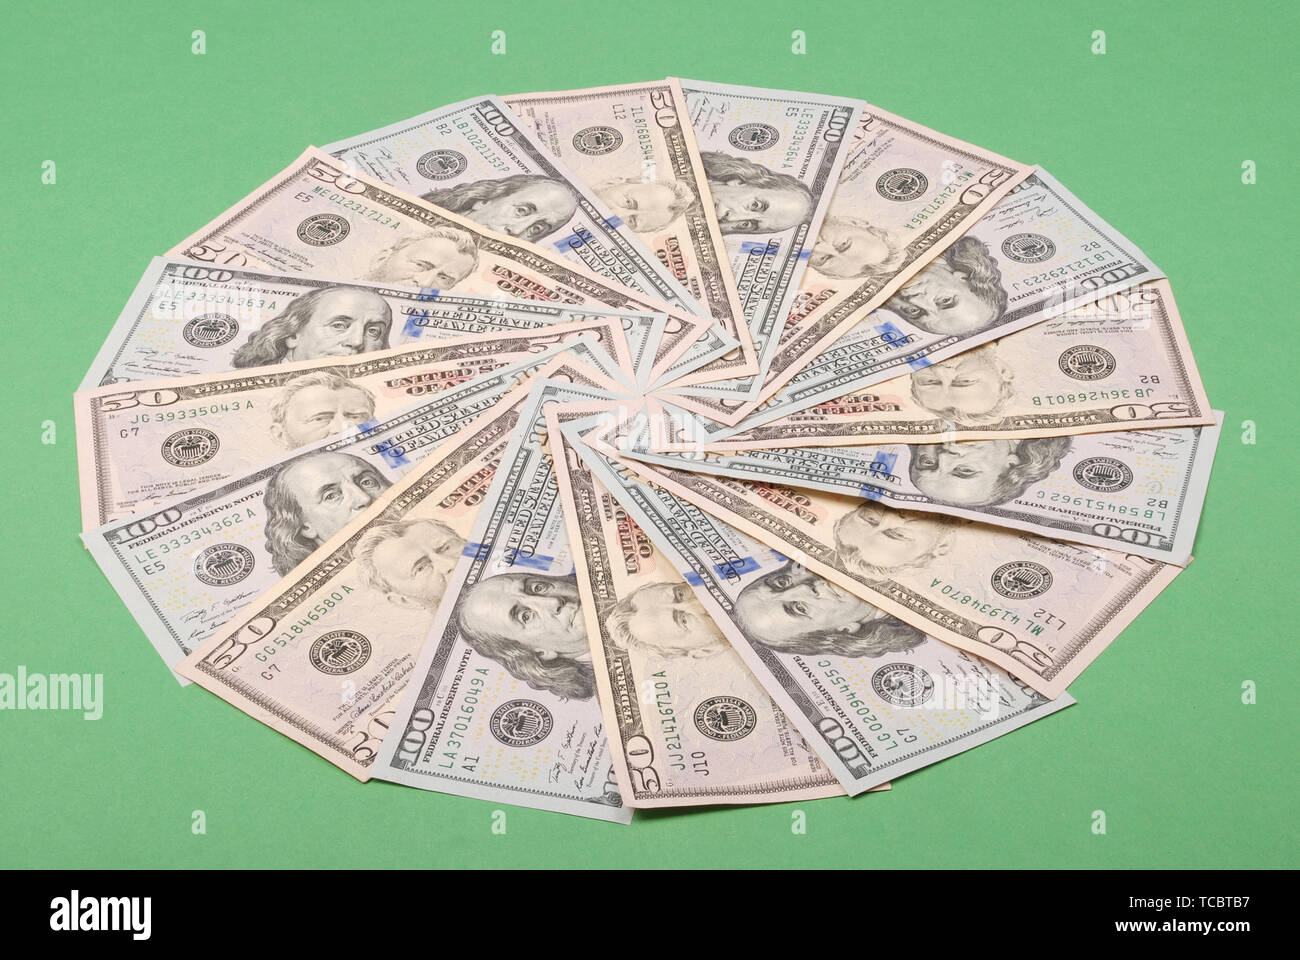 Money in the shape of a circle isolated on green background Stock Photo